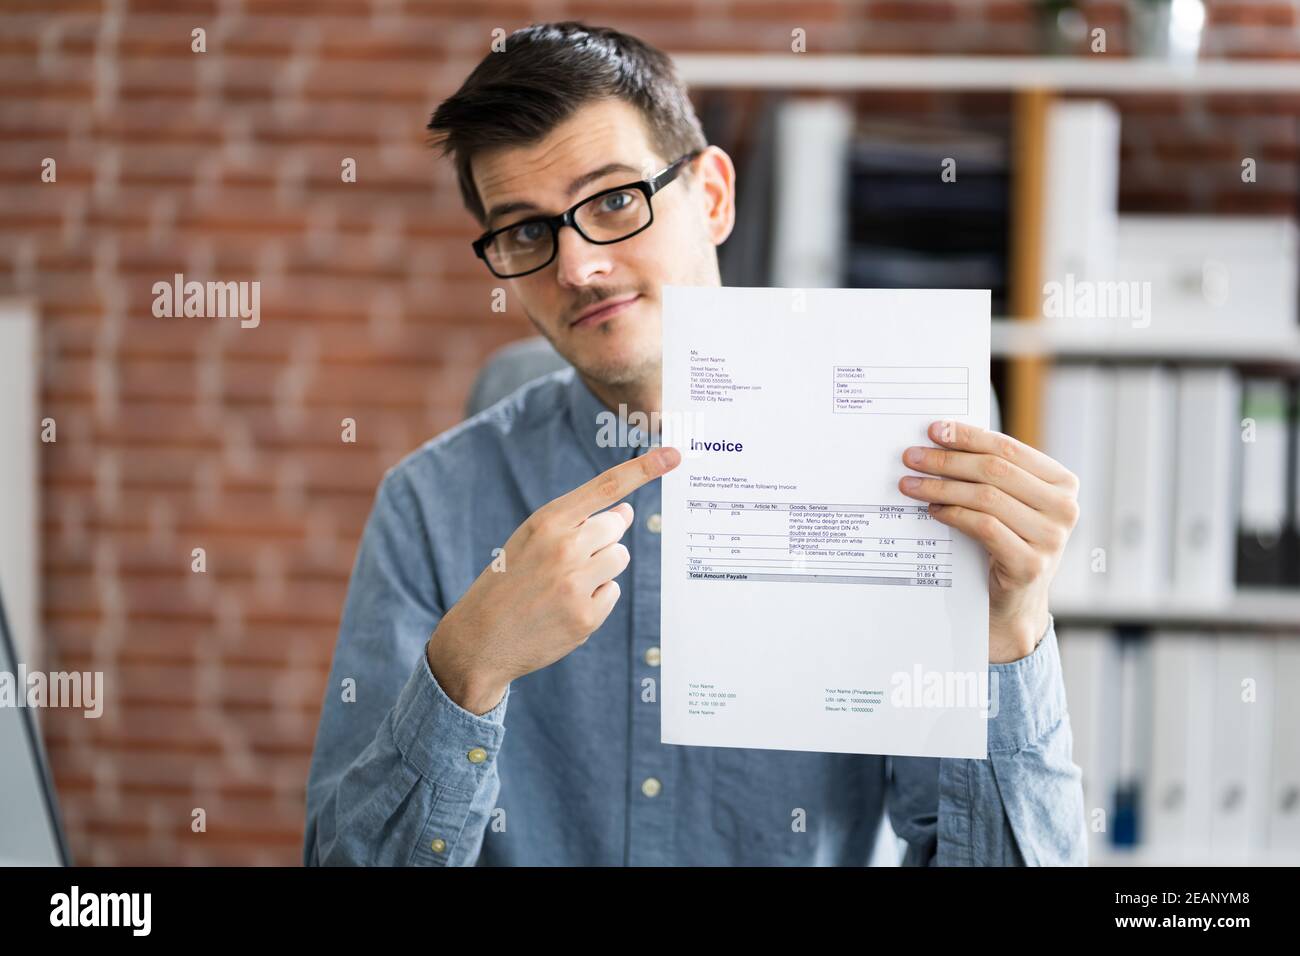 Professional Accountant Showing Sale Tax Invoice Stock Photo